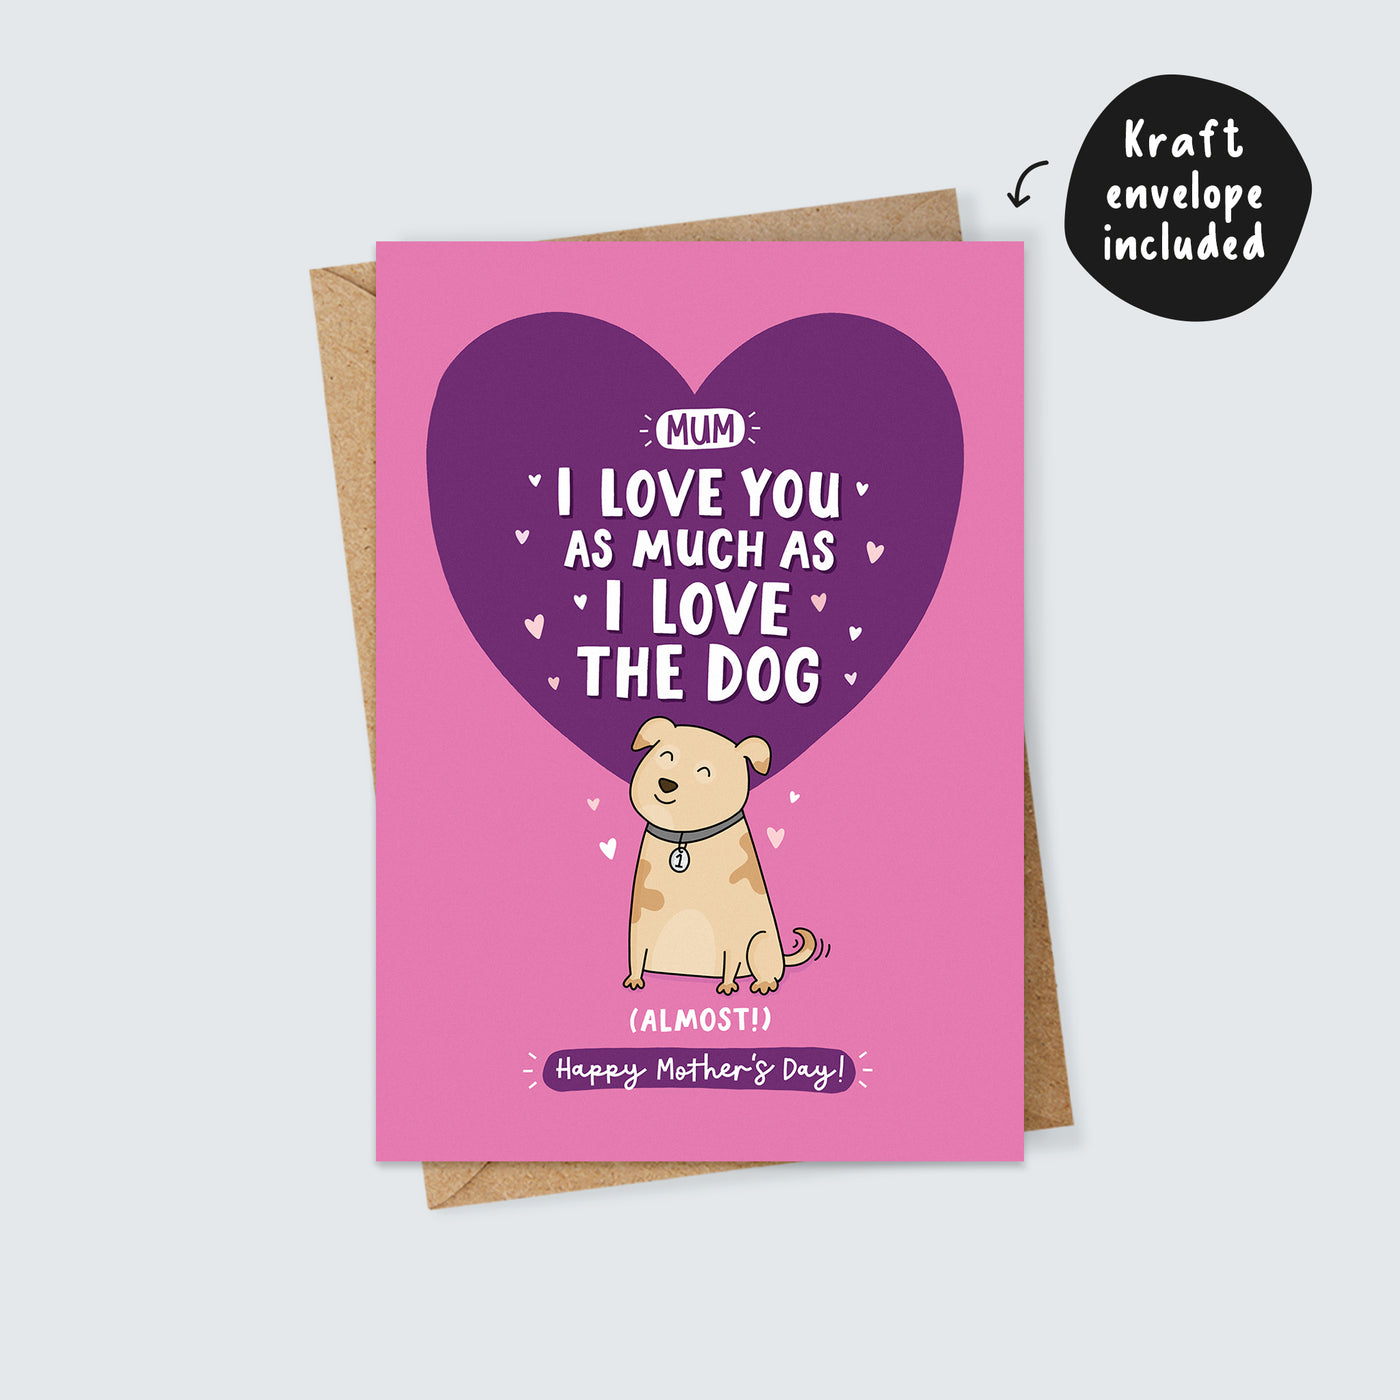 Mum I Love You as Much as I Love the Dog (Almost!) Mother's Day Card